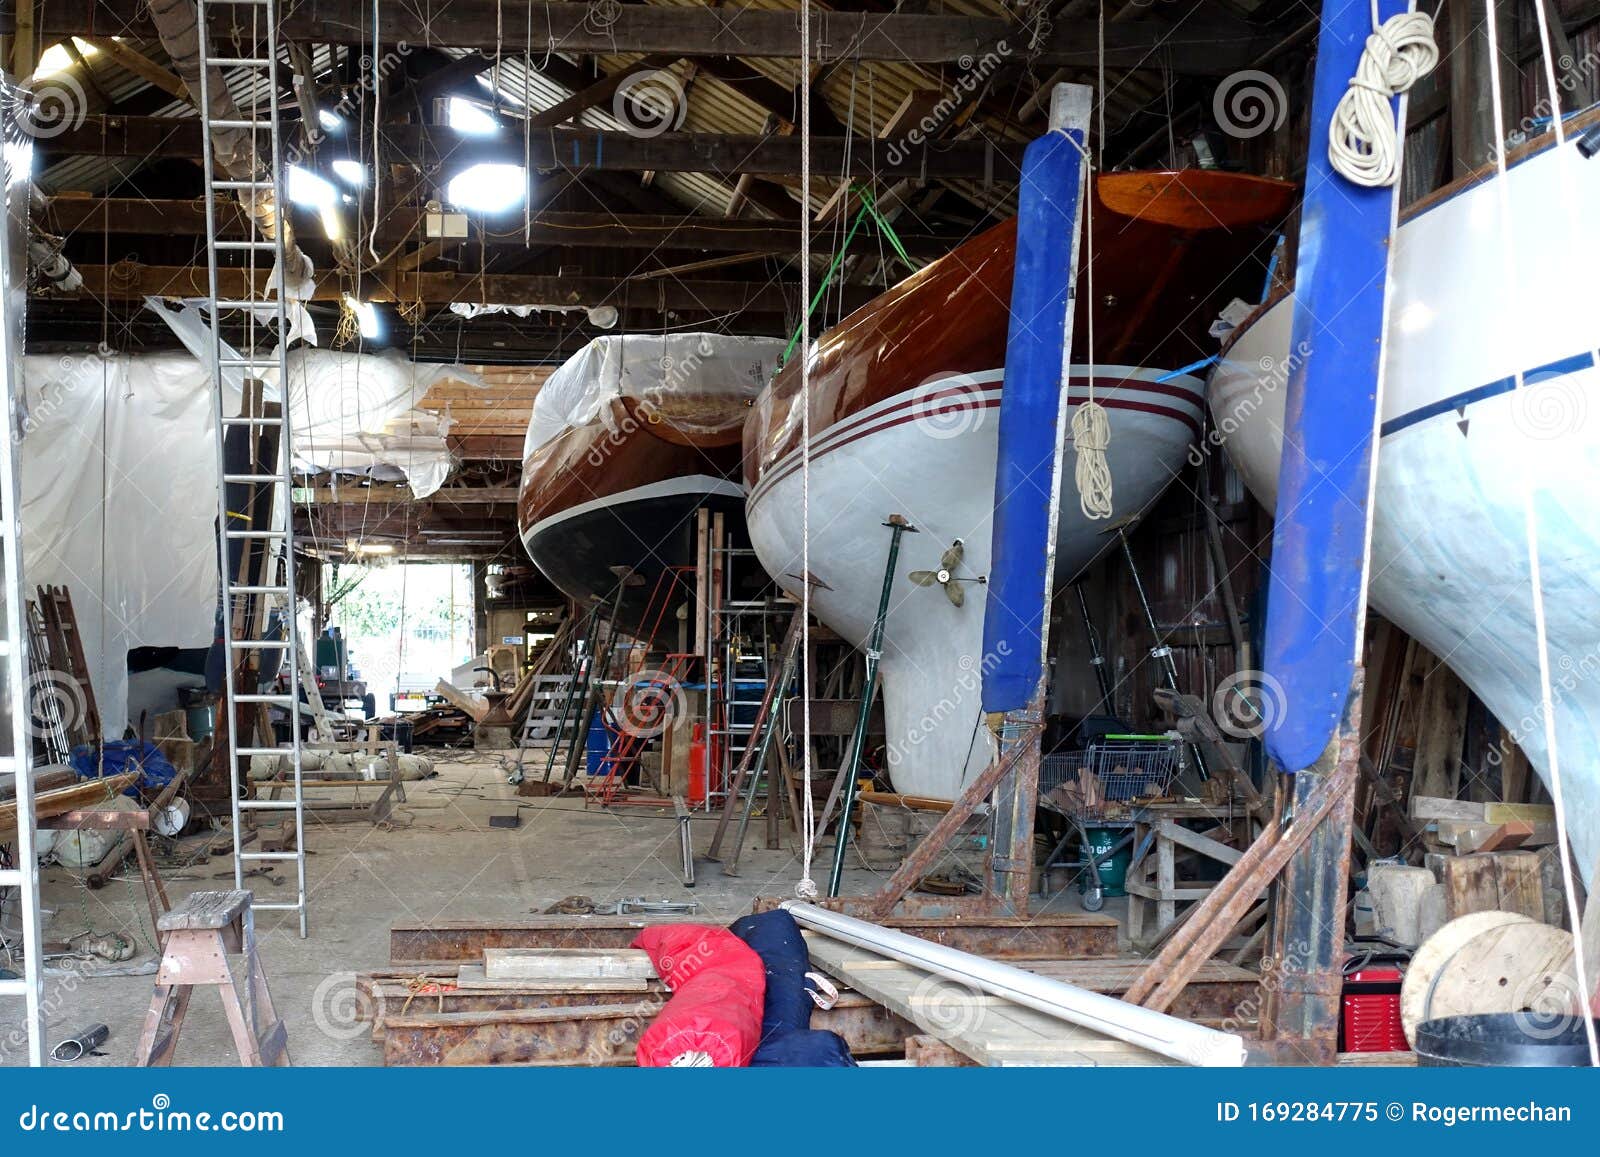 The Interior of a Boat Repair Yard, England. Boats Under Repair and ... - Interior Commercial Boat Repair YarD Showing Boats Supports Being RepaireD Slipways Cranes Miscellaneous Equipment 169284775